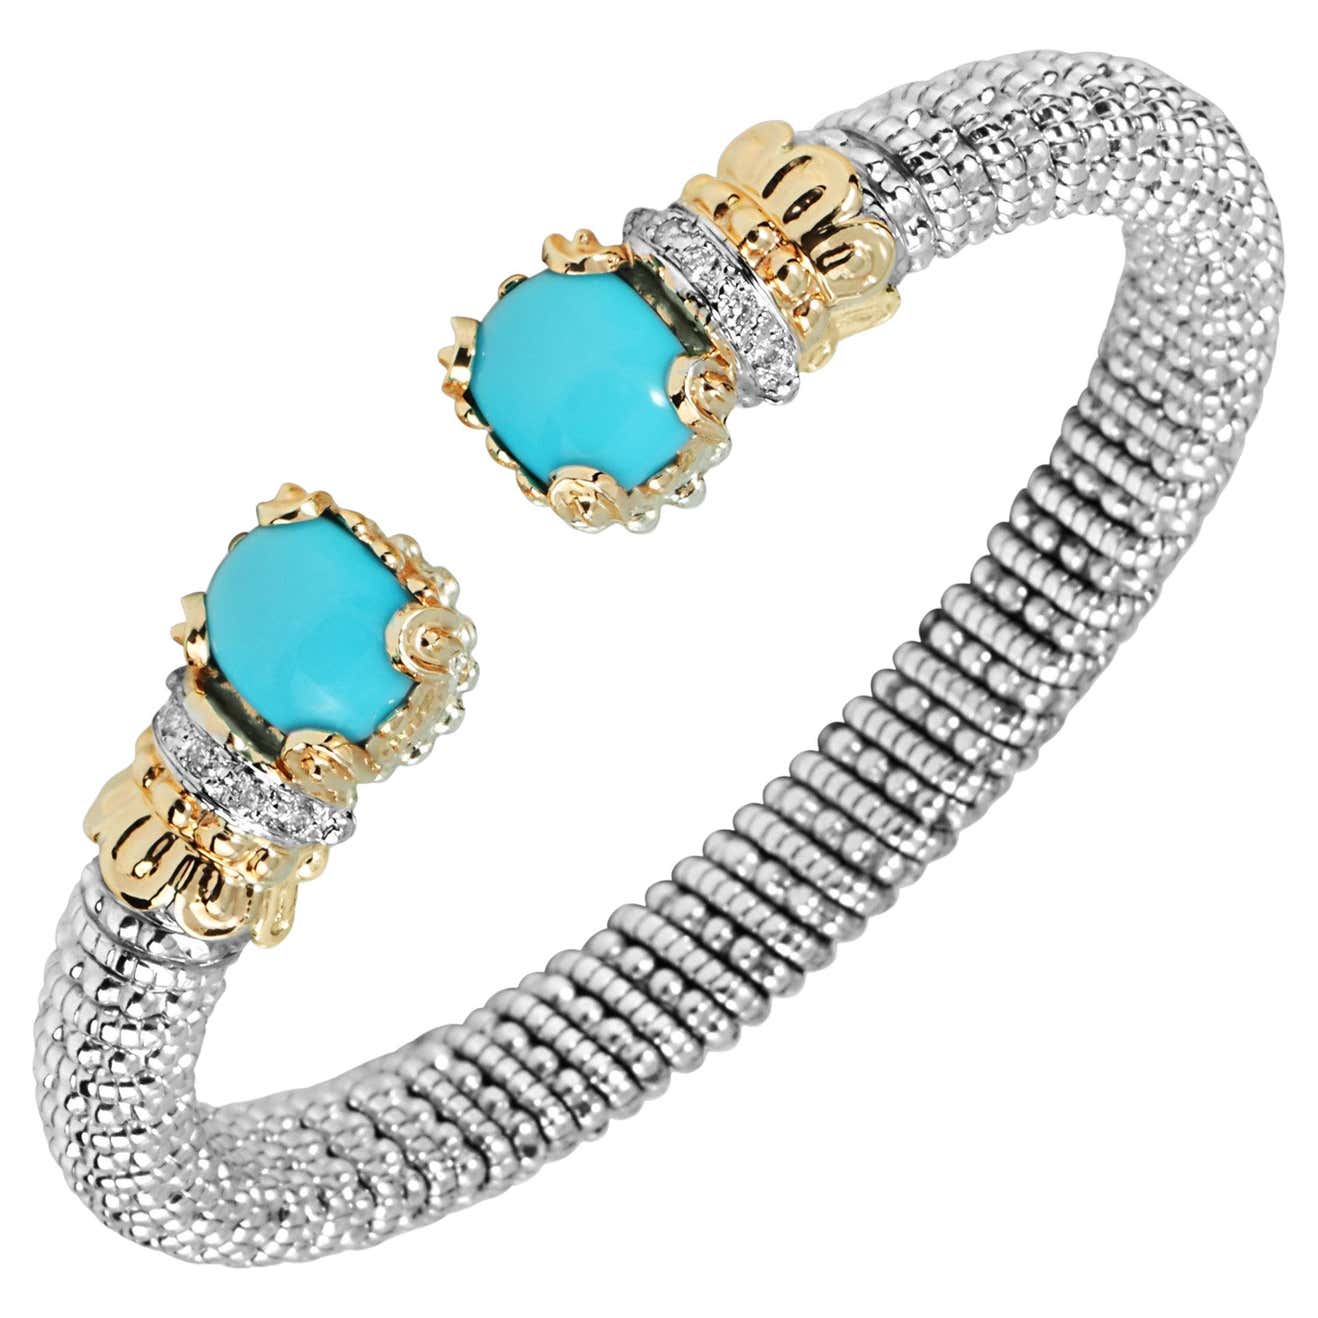 Vahan Open Bangle Bracelet Diamonds and Turquoise 14K Gold and Silver ...